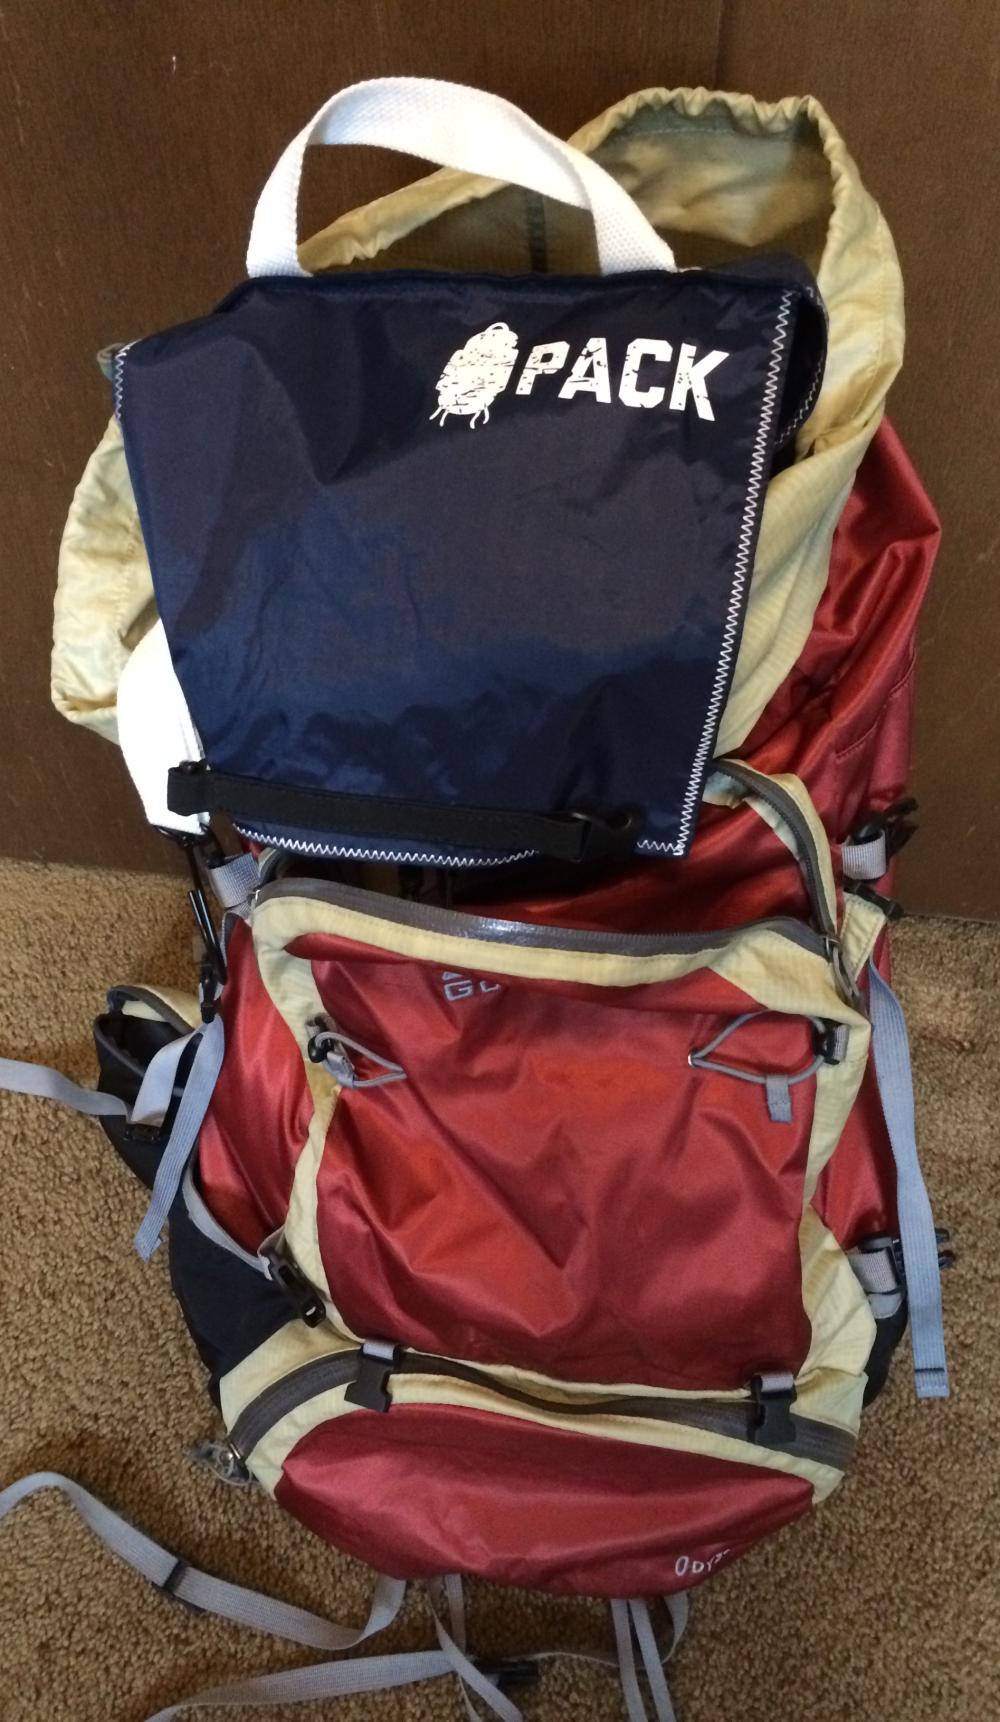 Packing a backpack might require internal organizers, like this navy blue one sitting on an orange and yellow backpack